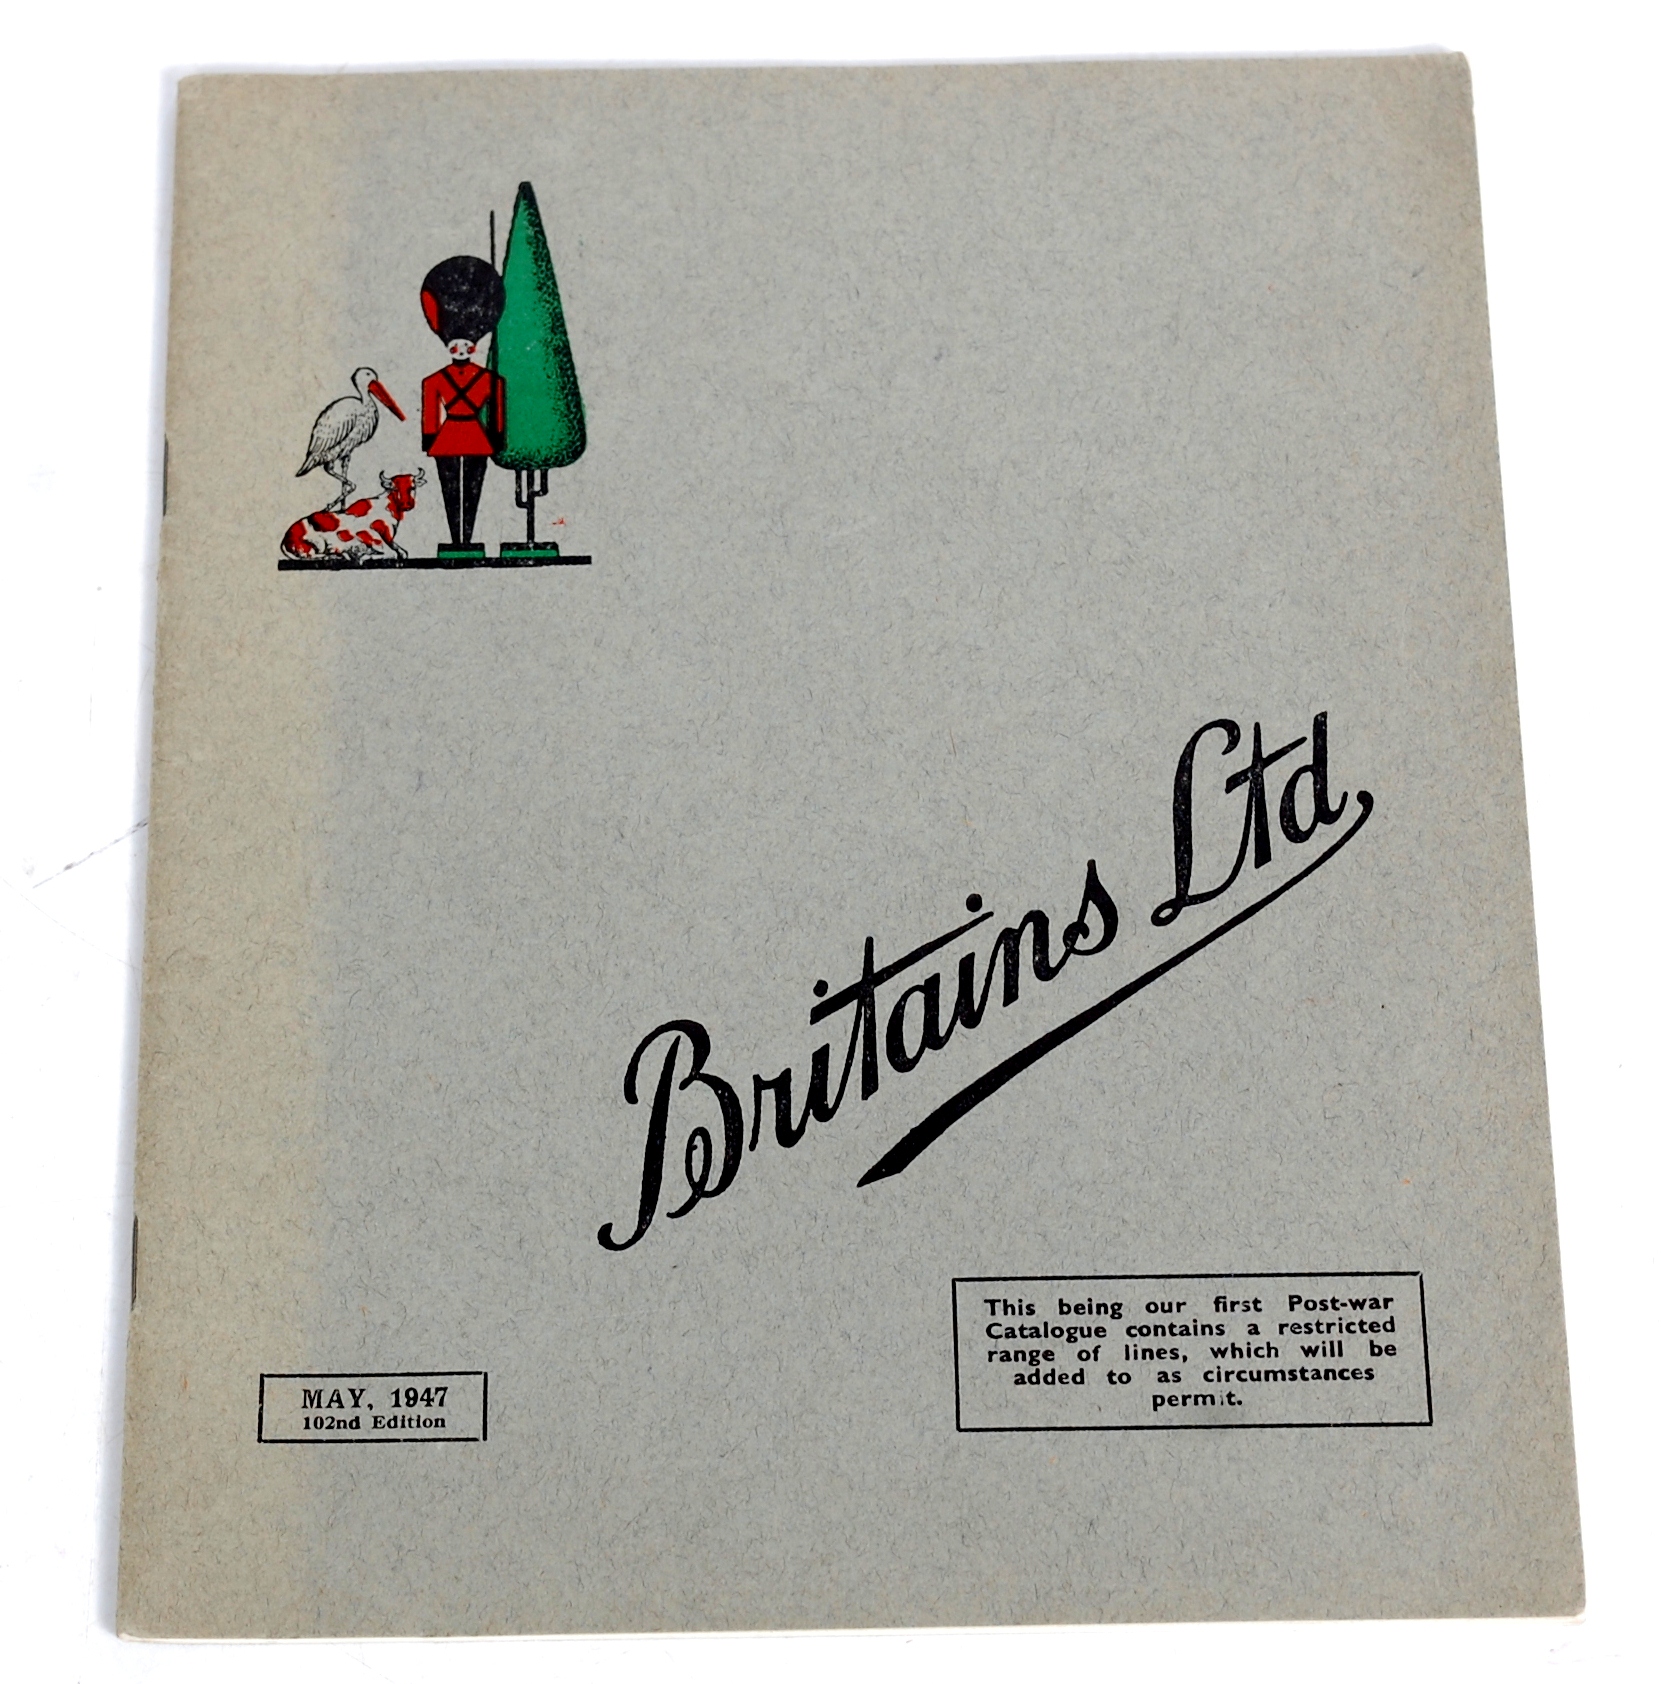 Britains 102nd Edition Catalogue Dated for May 1947, measuring 22.5 x 17.